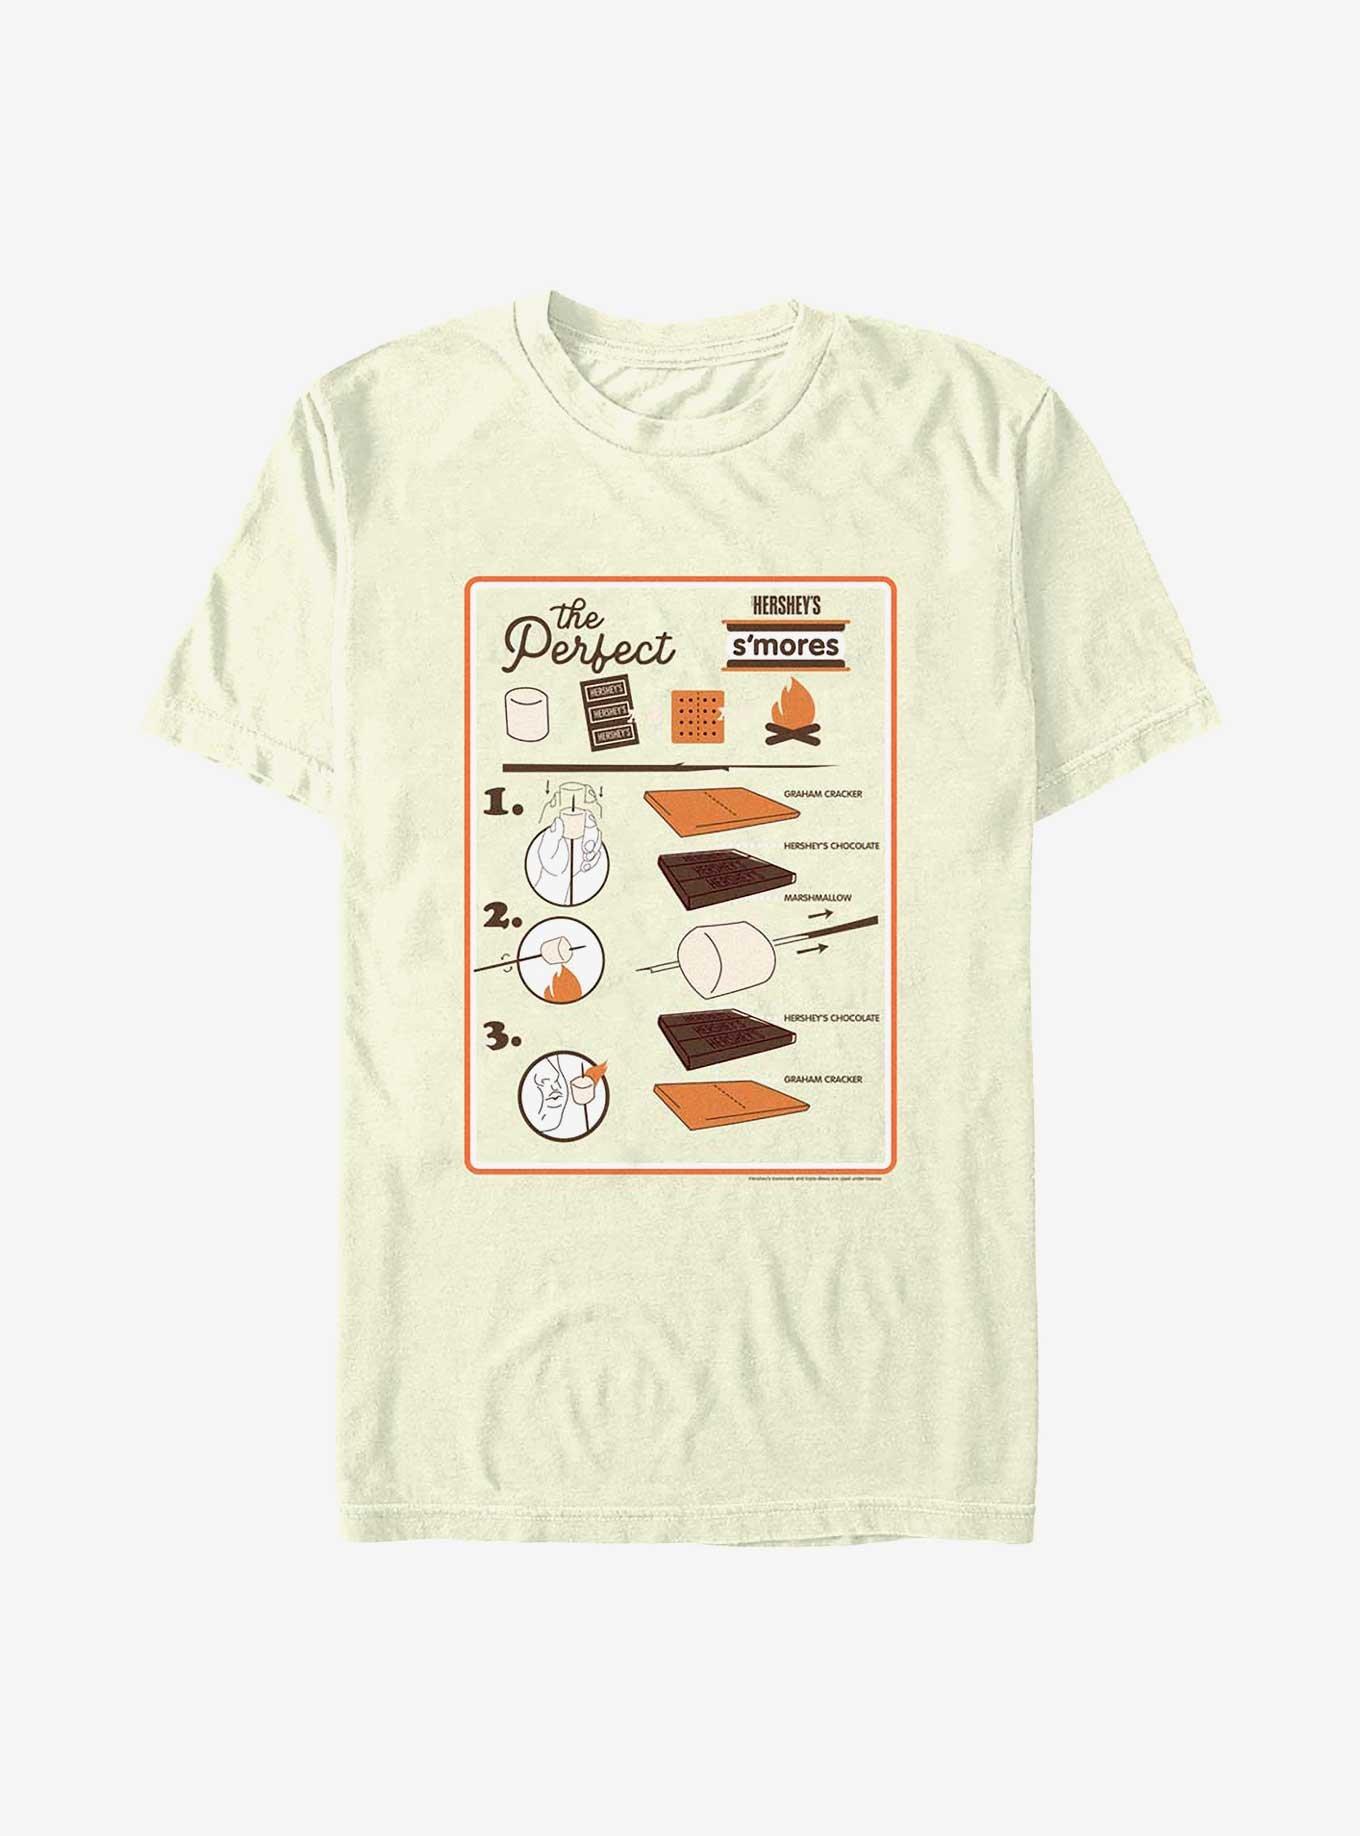 Hershey's S'mores Schematic T-Shirt